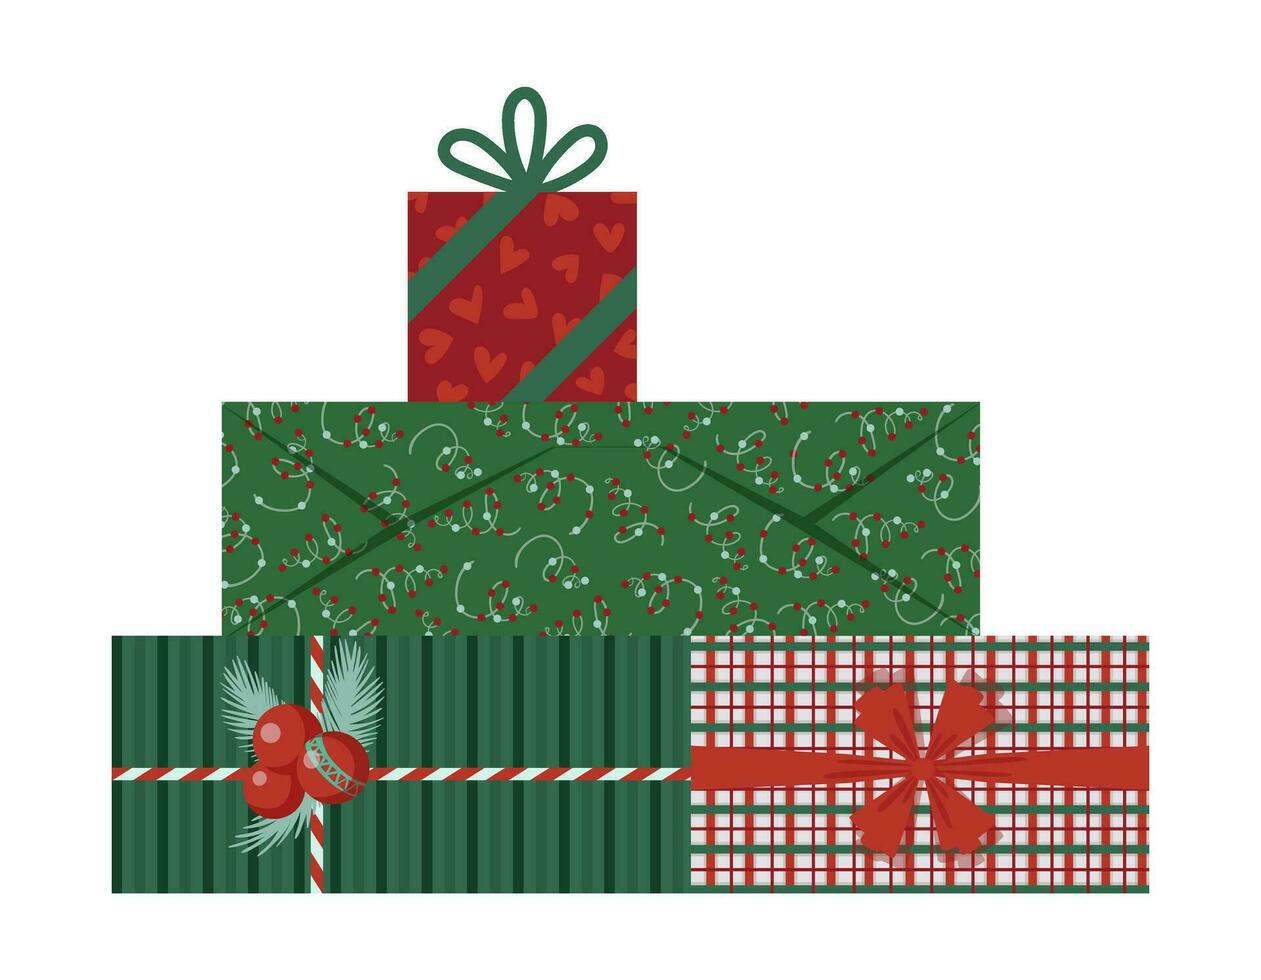 Wrapped Christmas gift boxes. New Year present boxes with ribbons, bows, green and red wrapping papers. For greeting cards, banners, web illustrations, icons, or logos. Vector illustration EPS 10